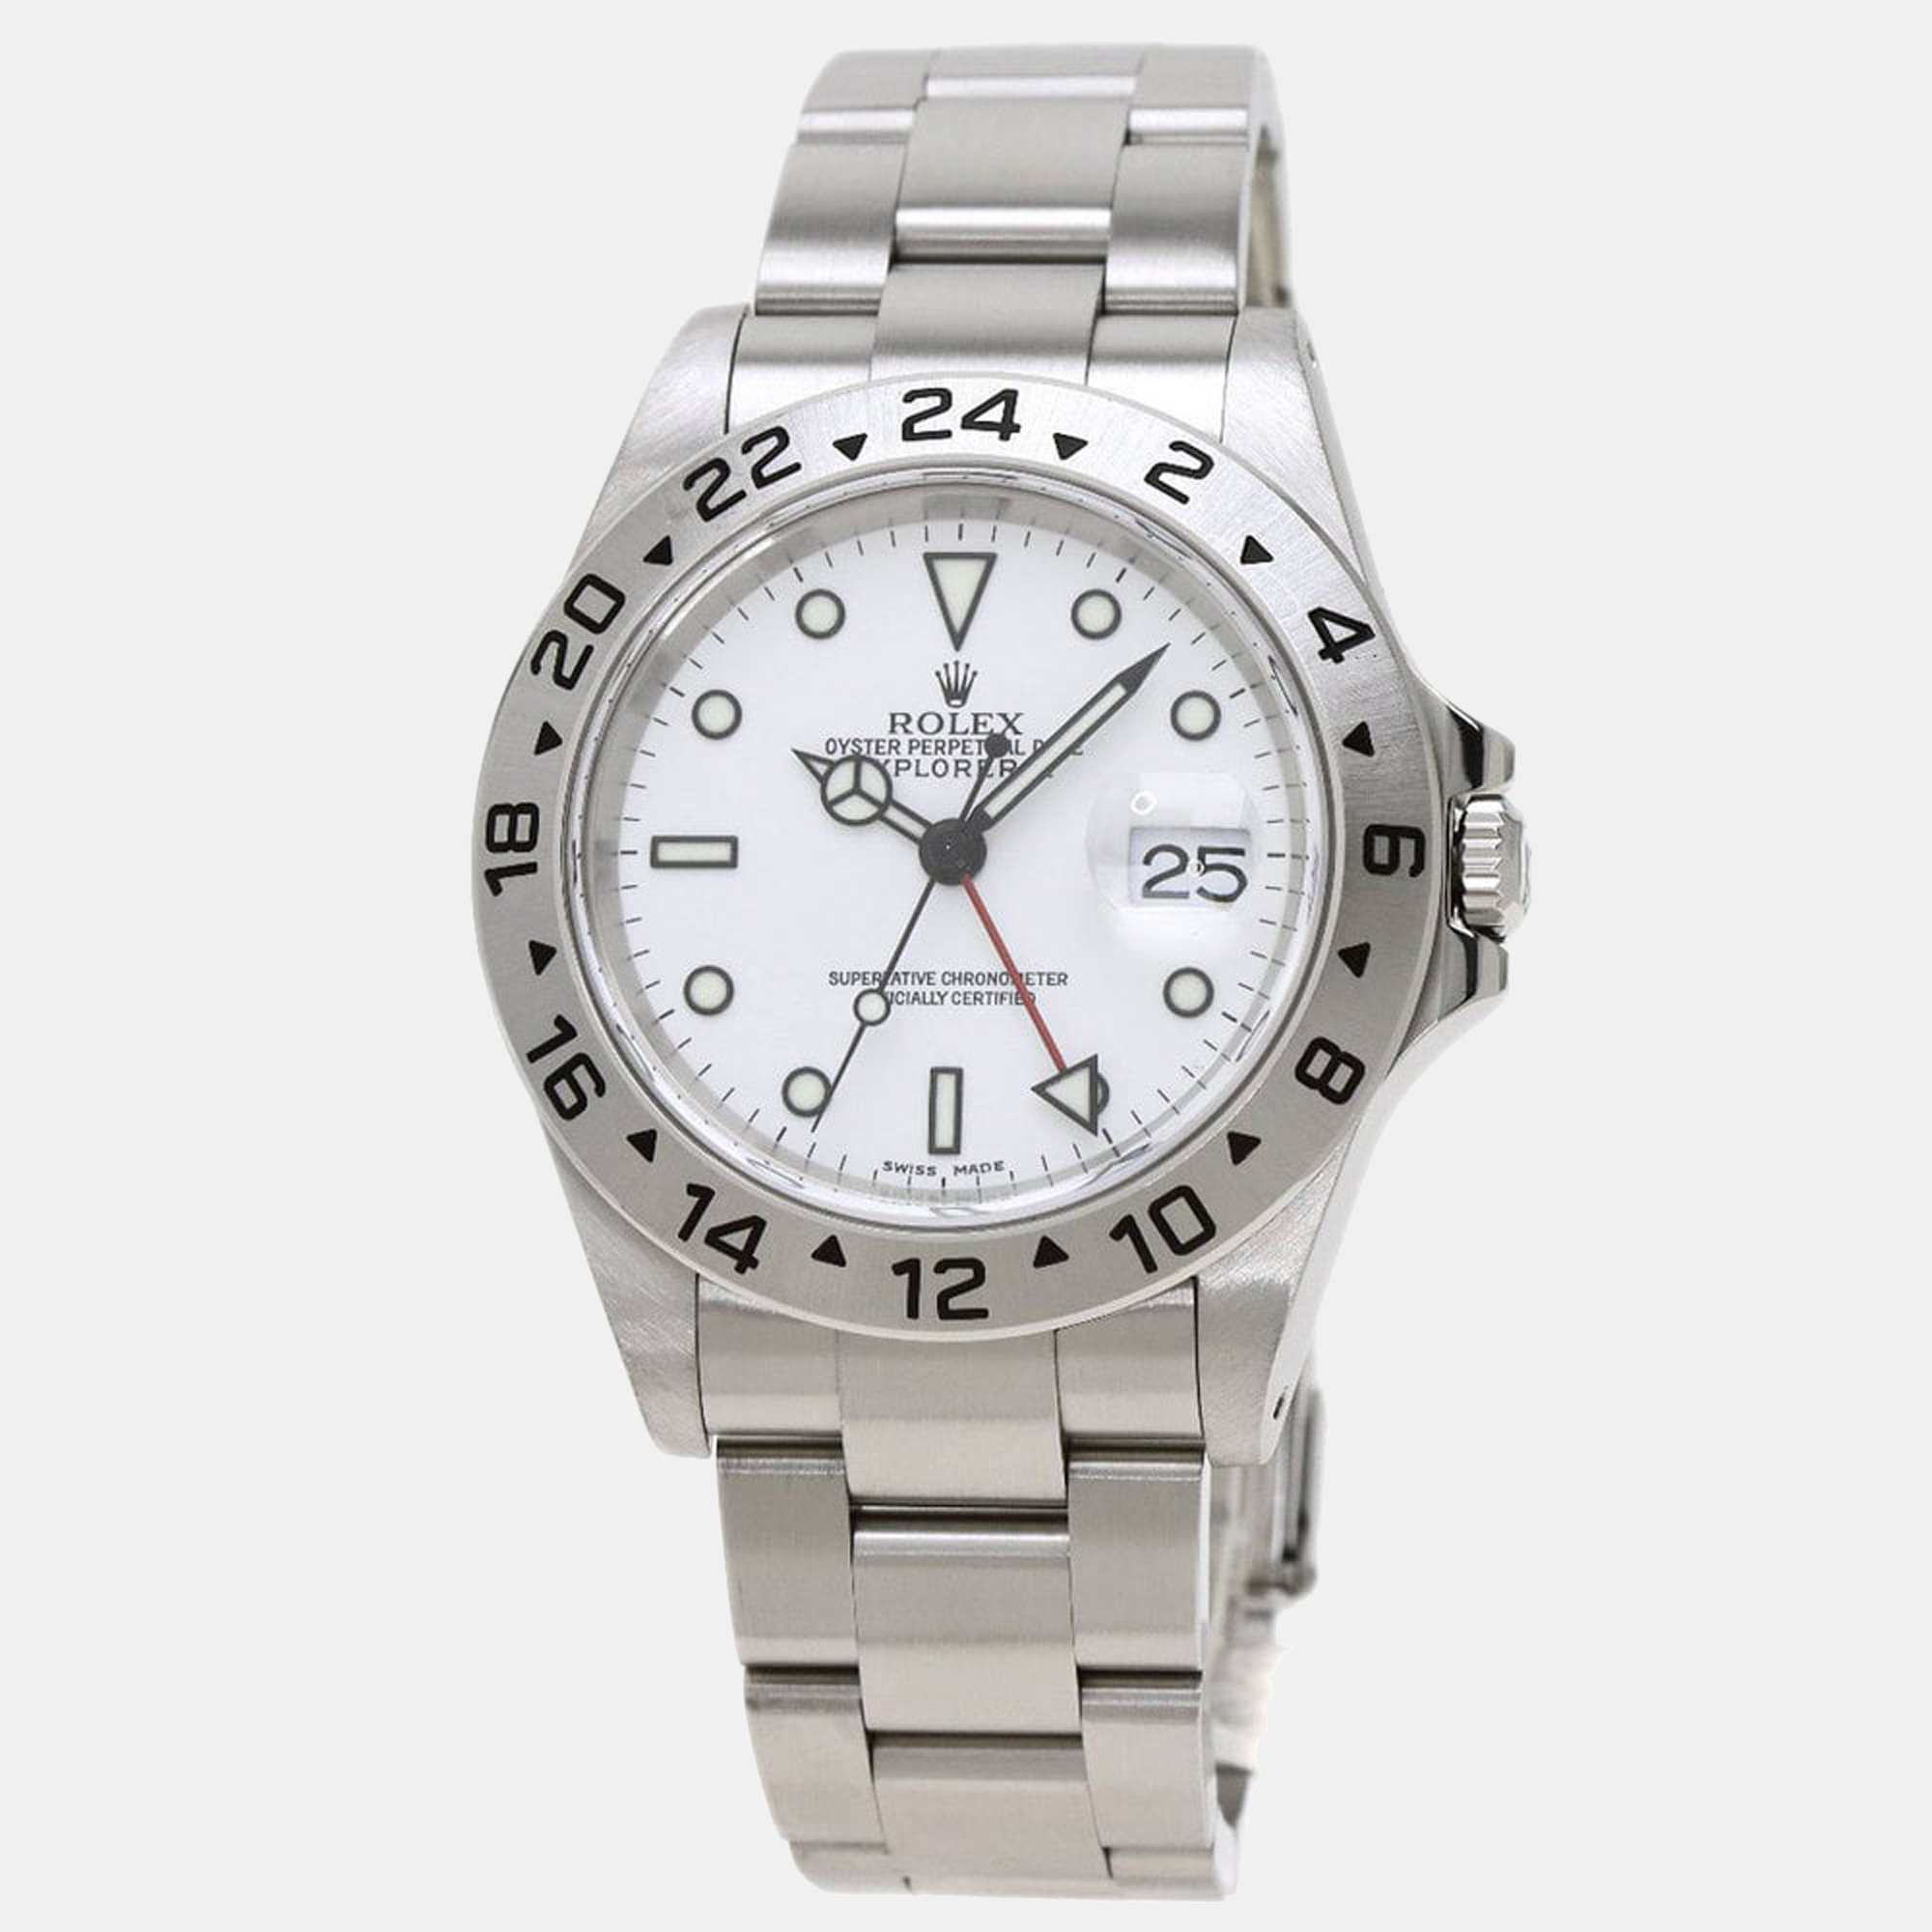 Pre-owned Rolex White Stainless Steel Explorer Ii 16570 Men's Wristwatch 40 Mm